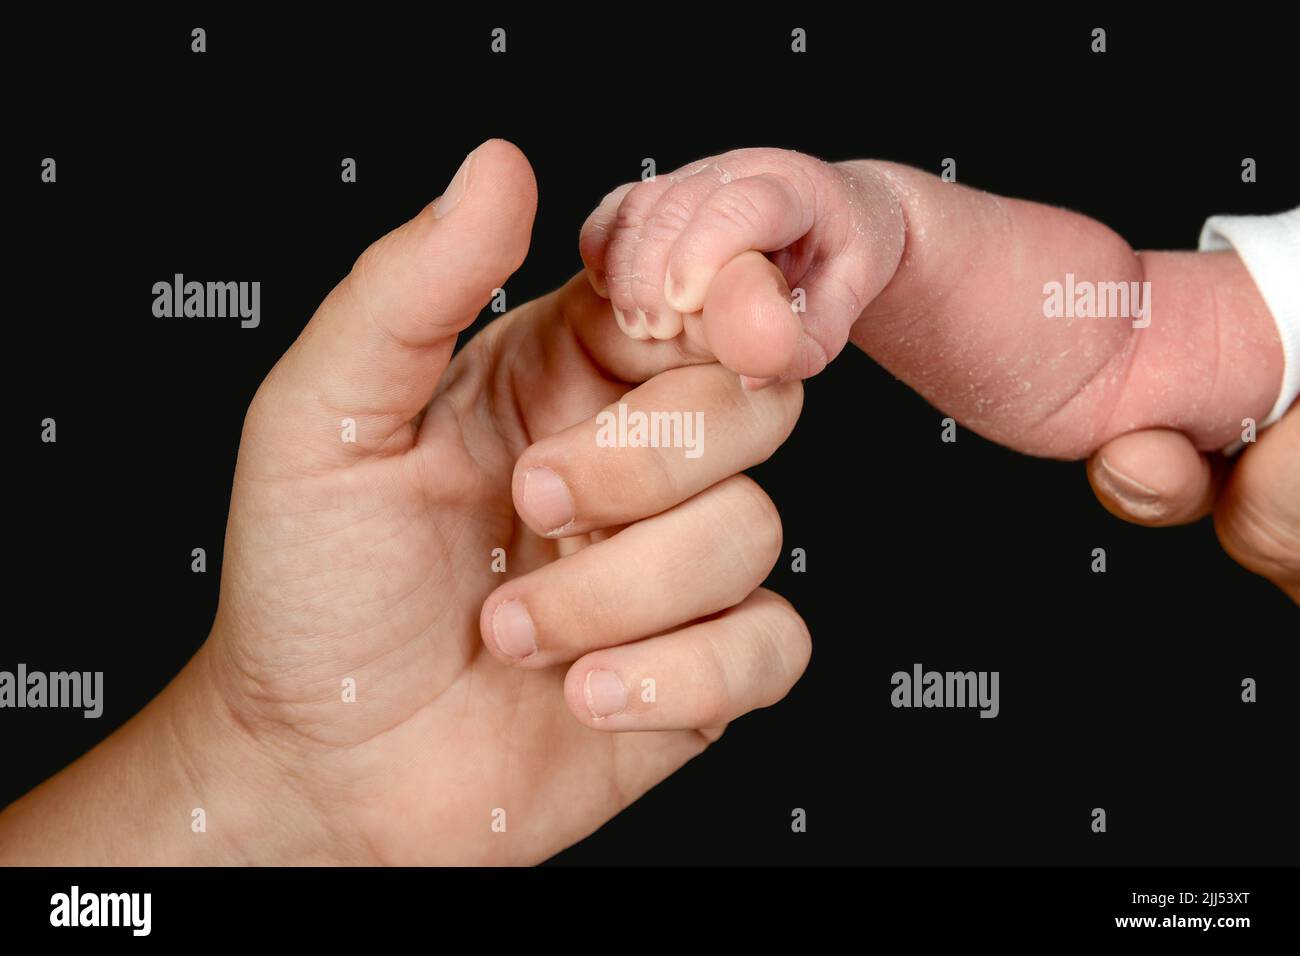 The small hand of a newborn caucasian baby grasps the hand of an adult person. Stock Photo